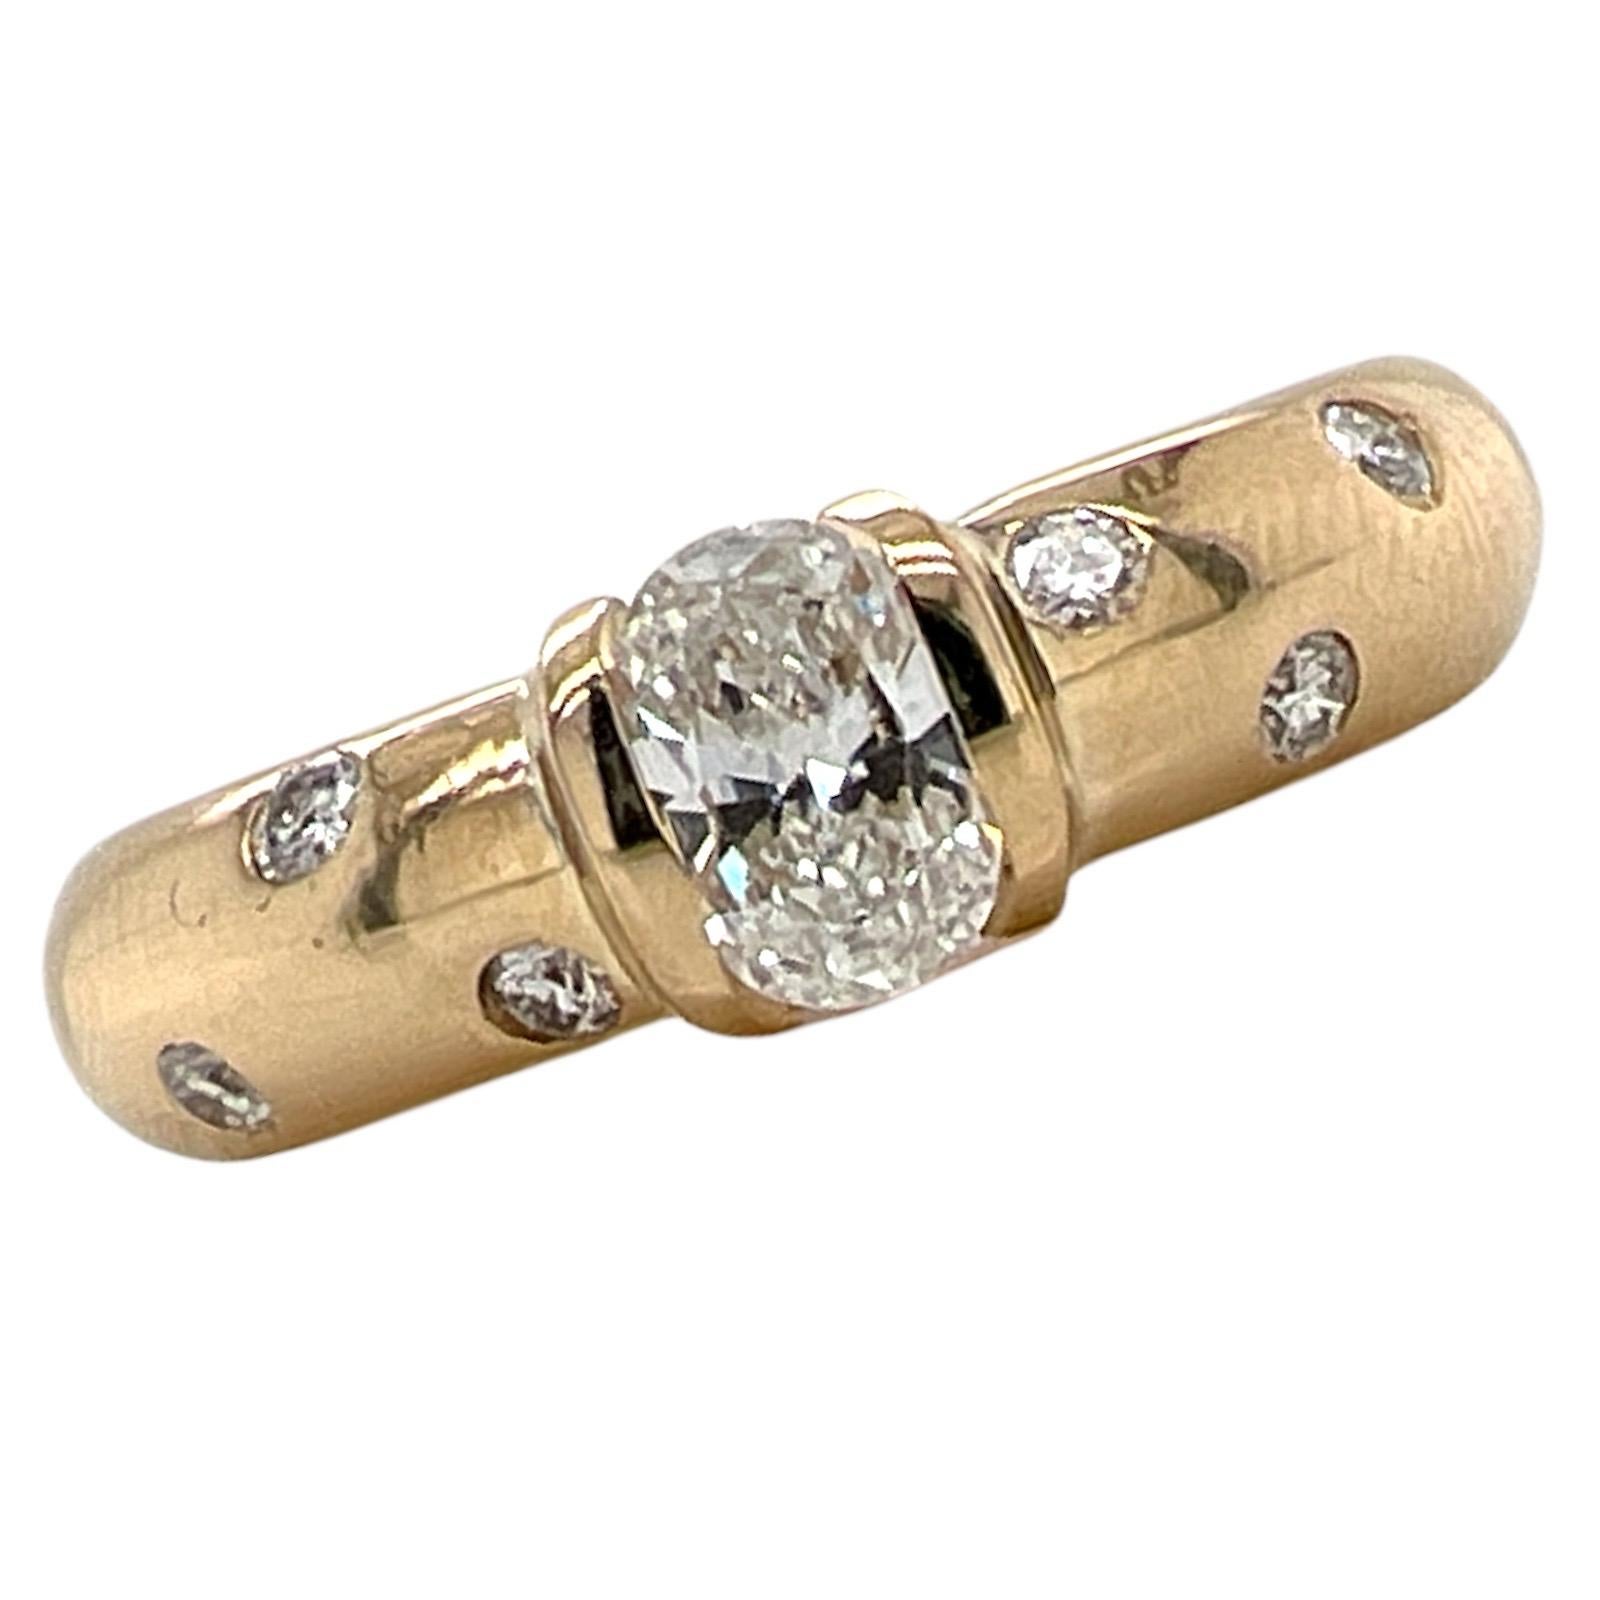 Beautiful oval diamond band ring fashioned in 14 karat yellow gold. The ring features an .46 carat oval diamond graded G color and VS2 clarity by the GIA. The etoile band features another 6 round brilliant cut diamond accents. The band measures 5mm